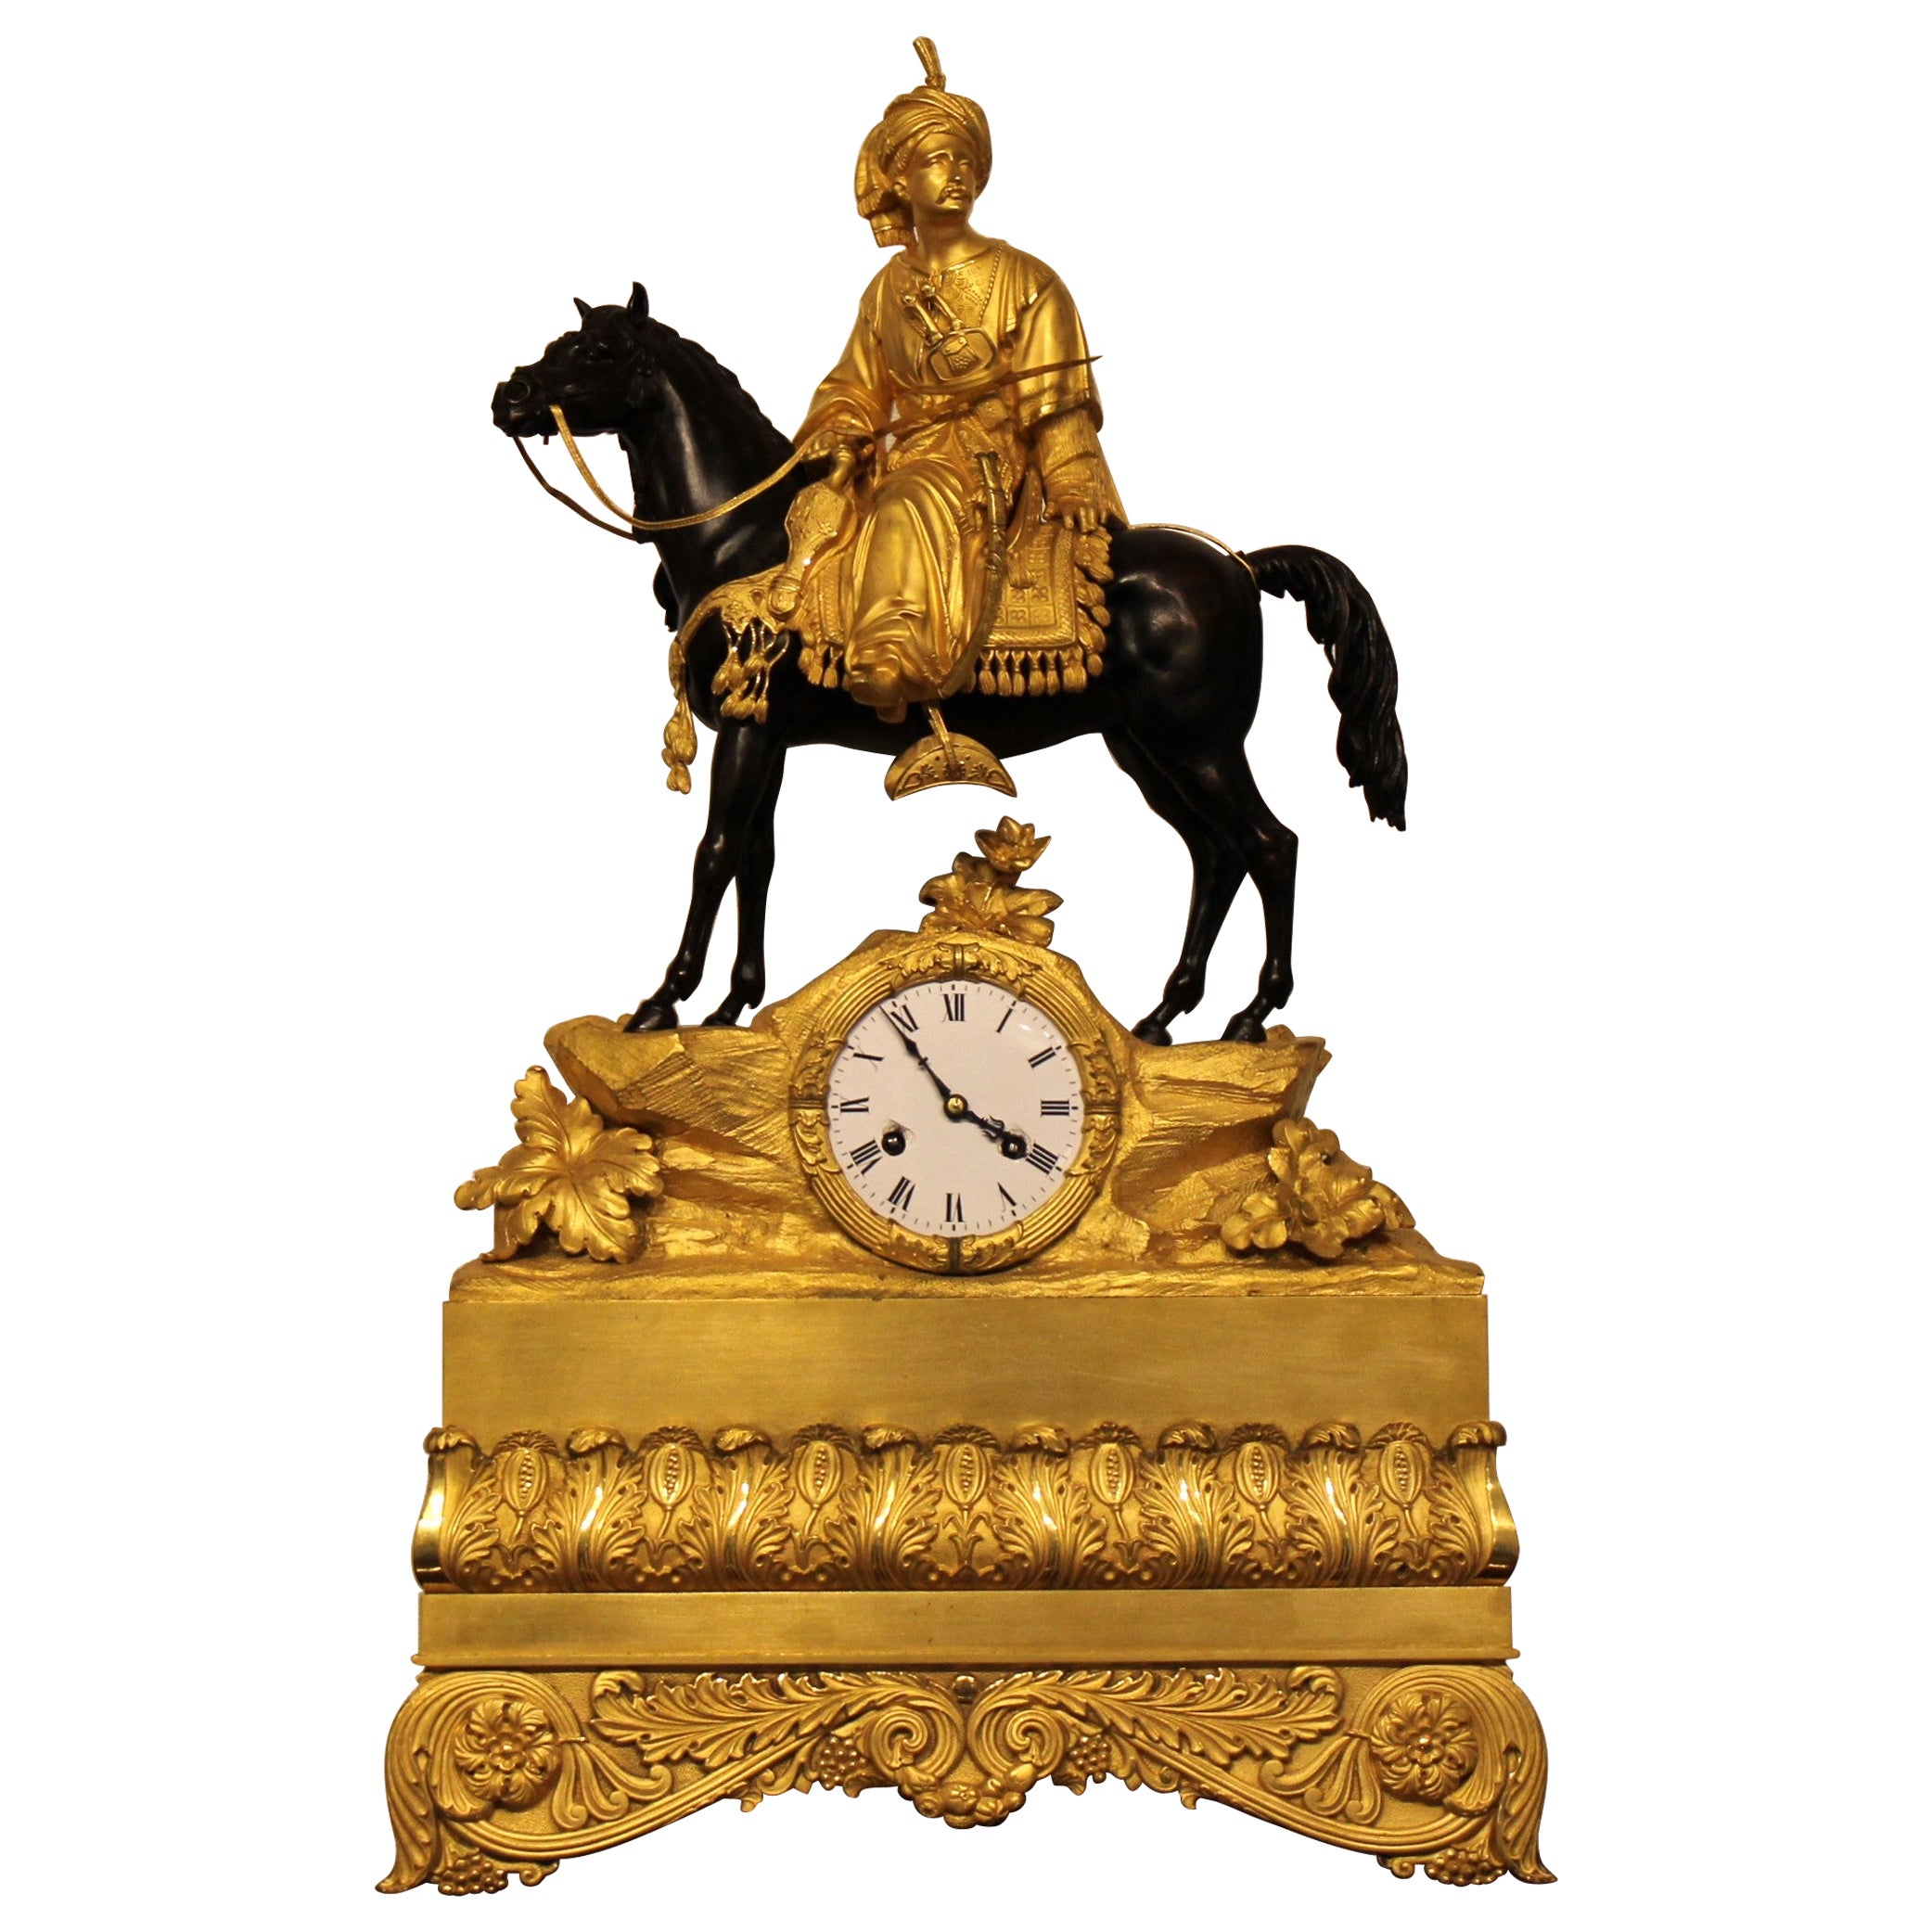 Orientalist table clock from the early 19th century